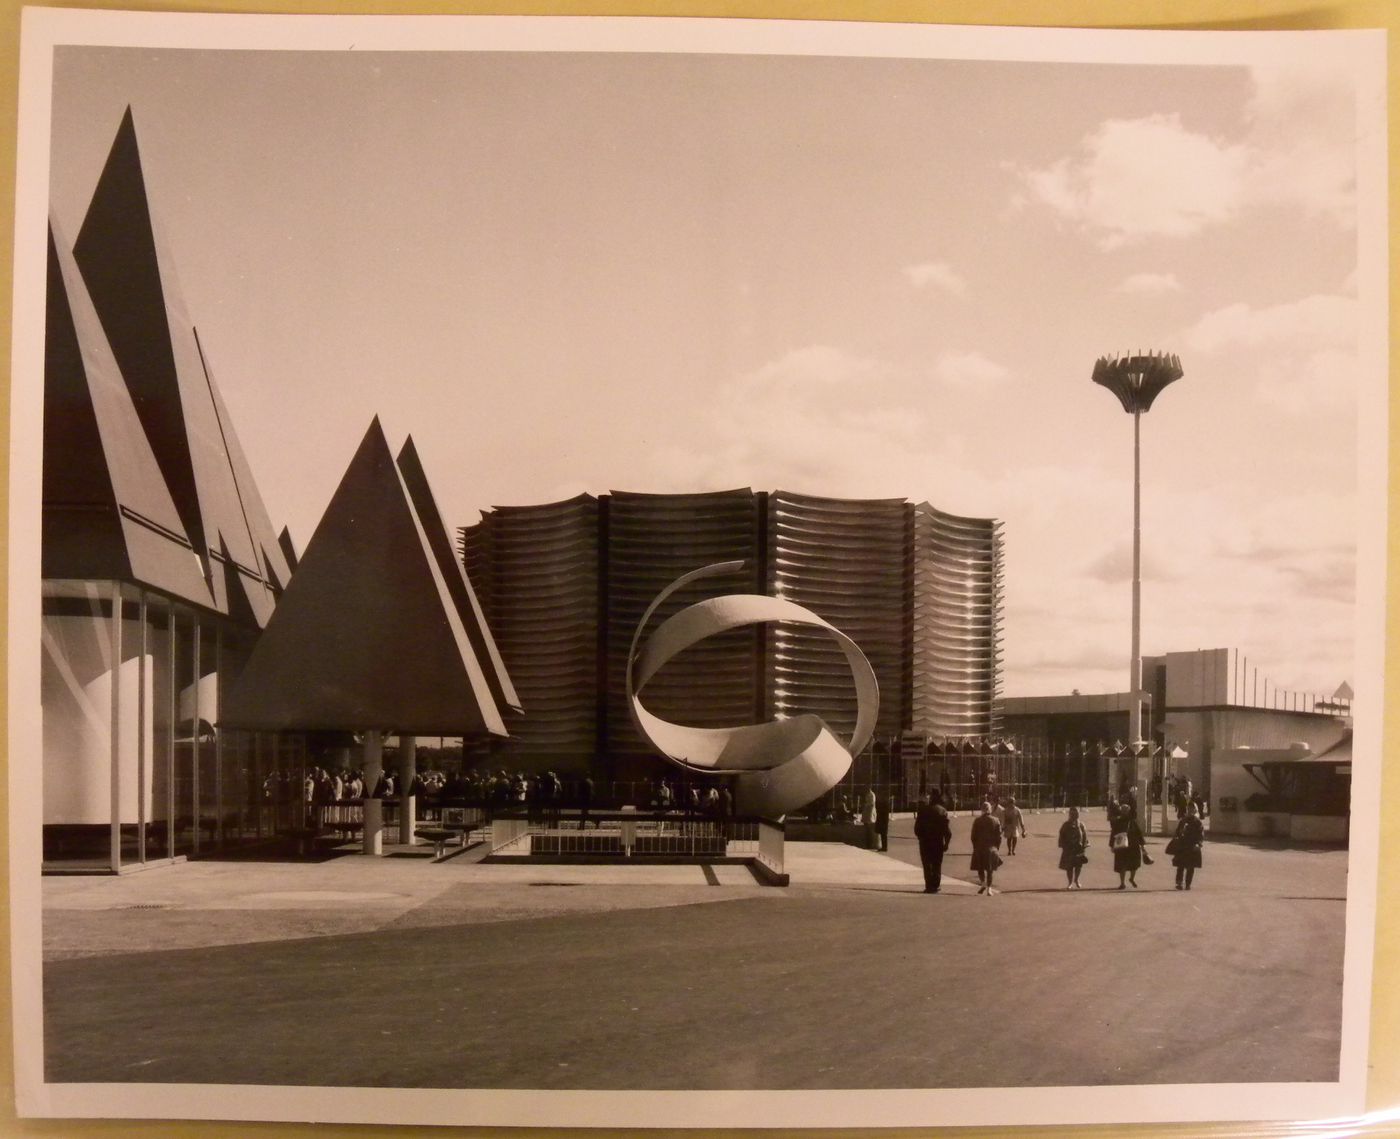 Partial view of the Canadian Pacific-Cominco Pavilion with the Canadian Pulp and Paper Pavilion on the left and a sculpture in foreground, Expo 67, Montréal, Québec